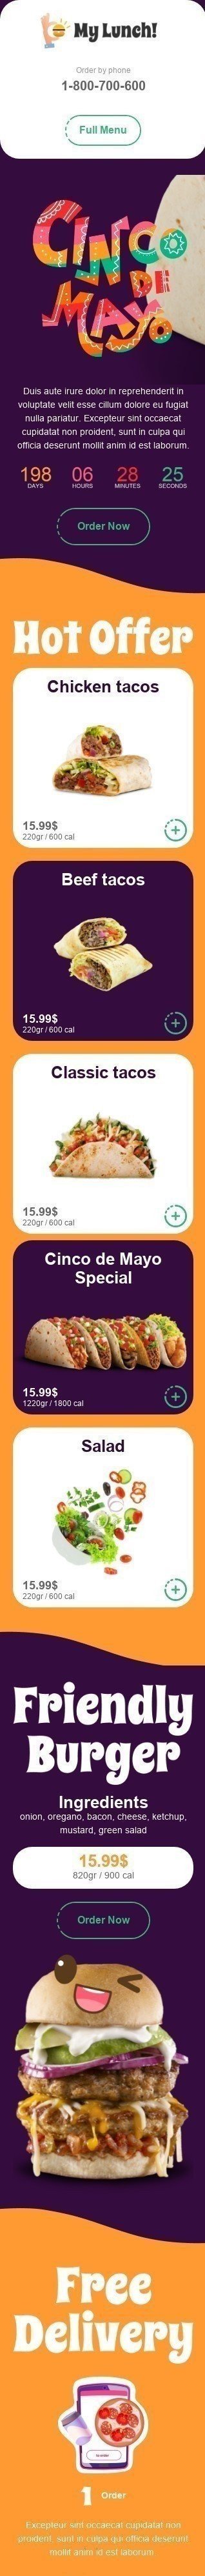 Cinco de Mayo Email Template "Classic tacos" for Food industry mobile view